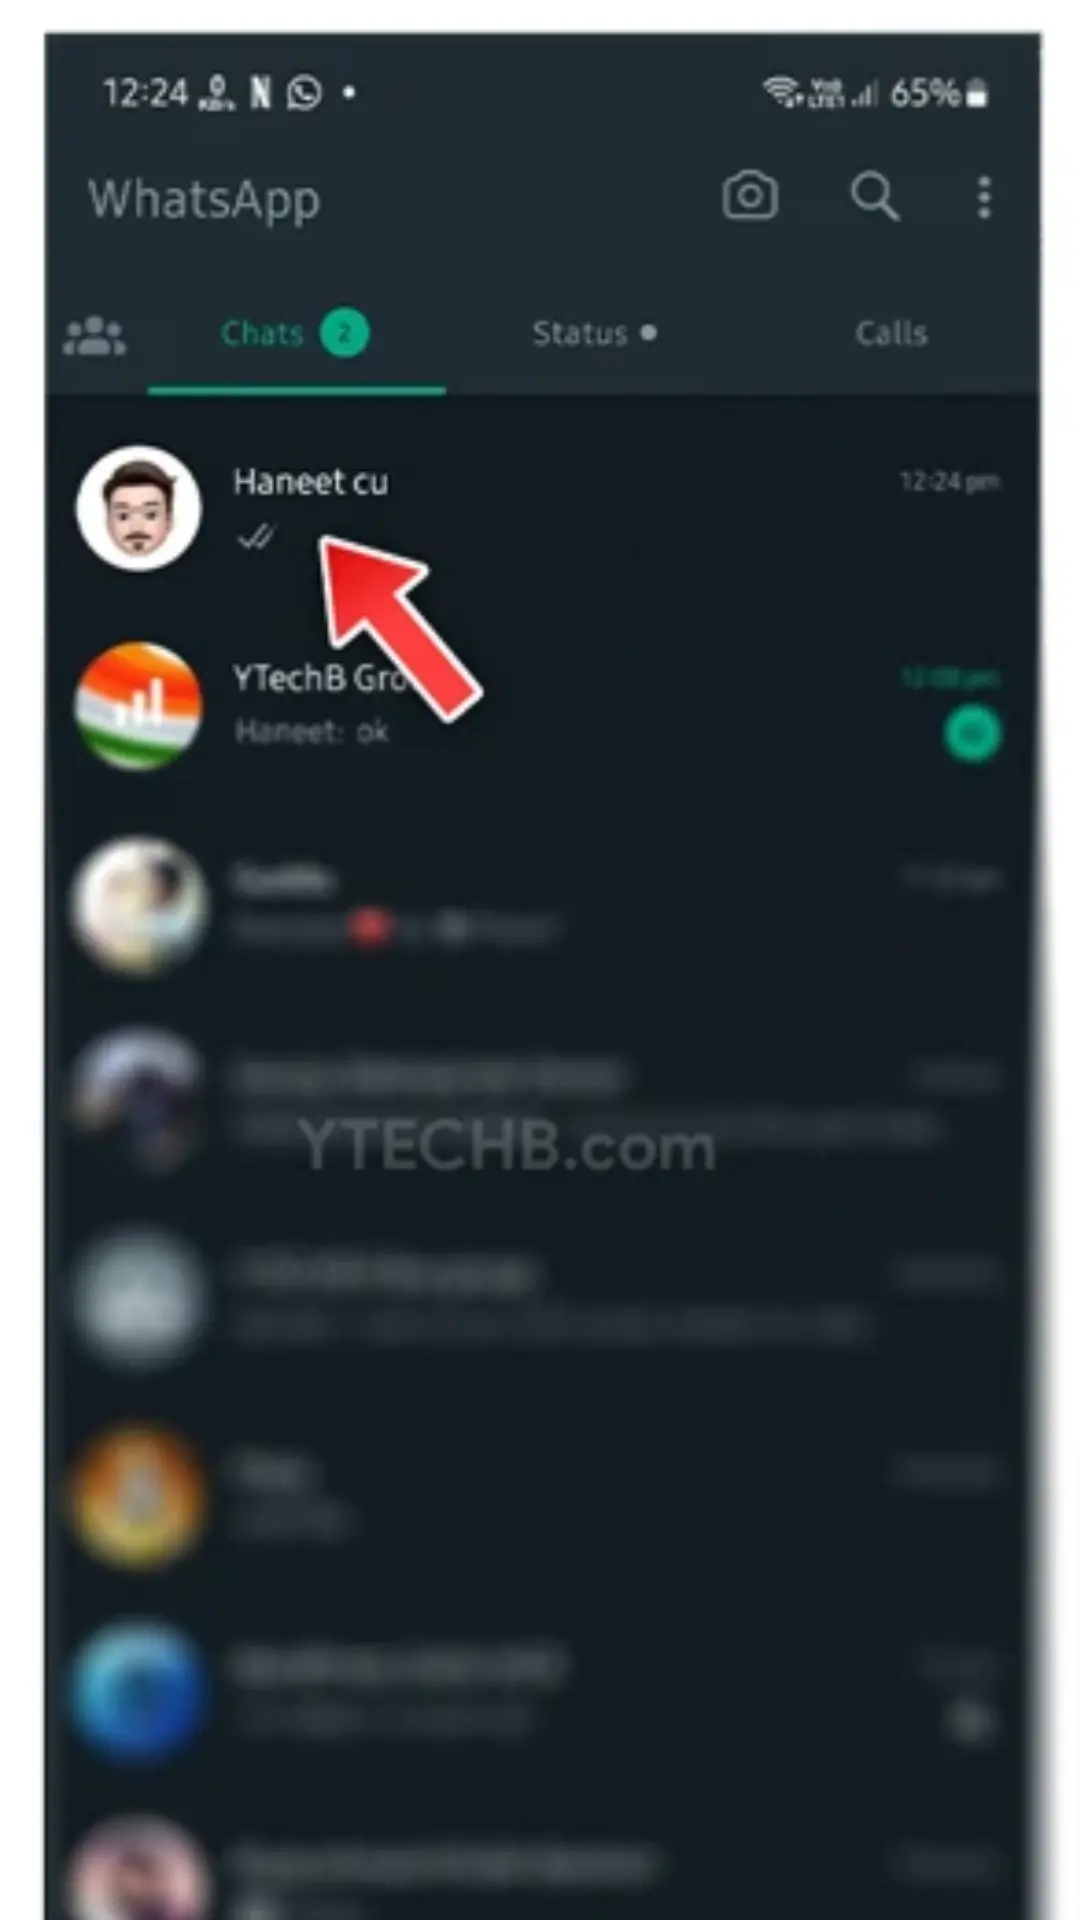 screenshot  of "i" icon in chat lock